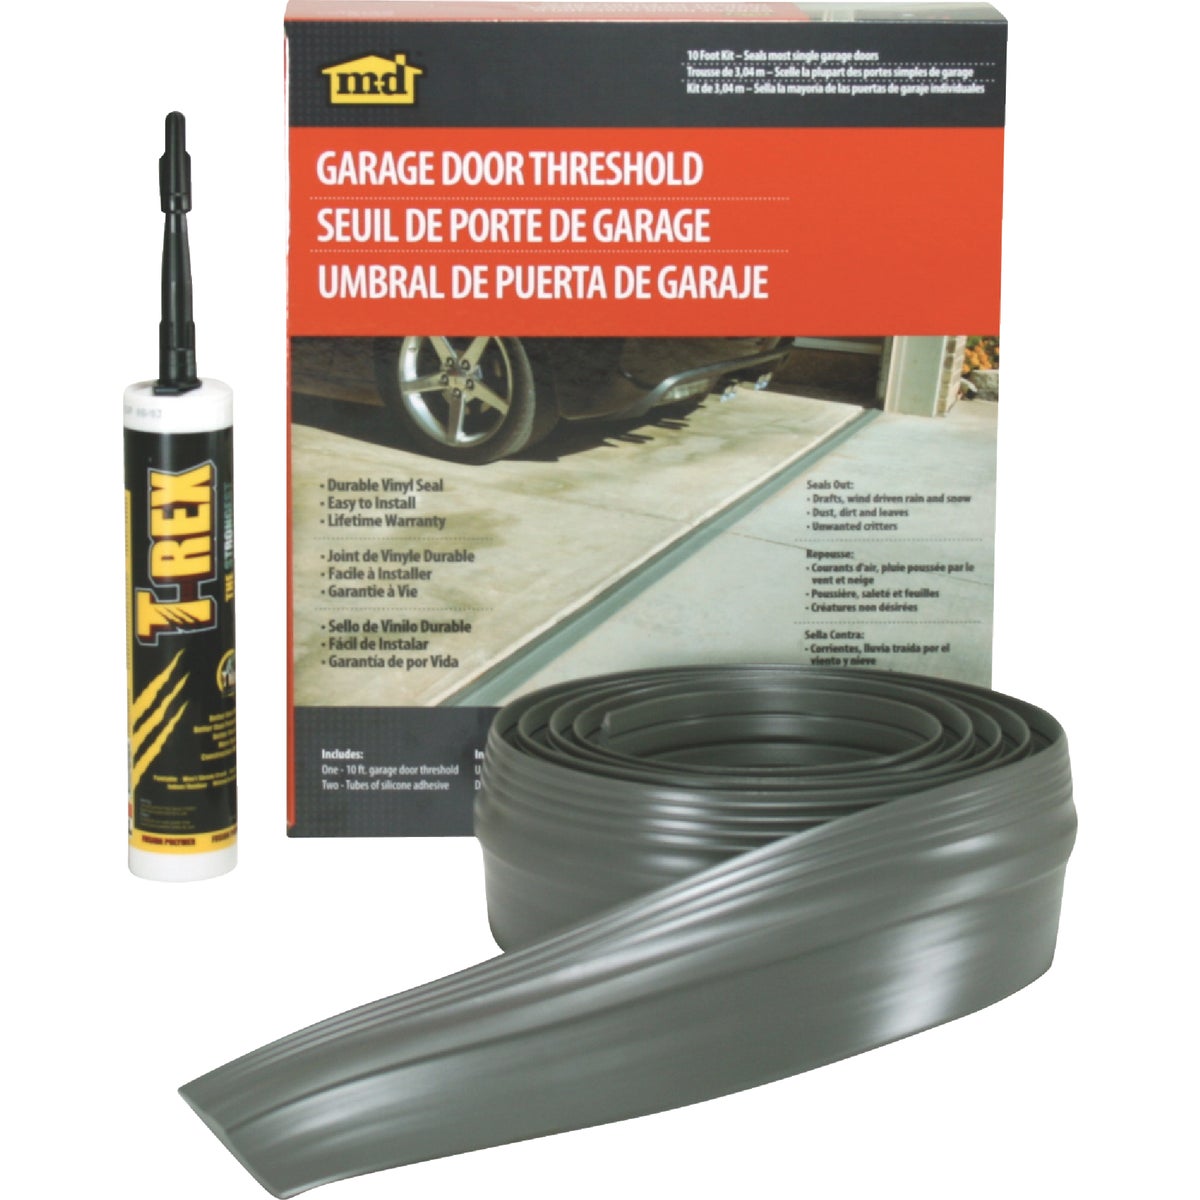 Item 275703, Durable, high-quality vinyl seal for single or double garage bays.